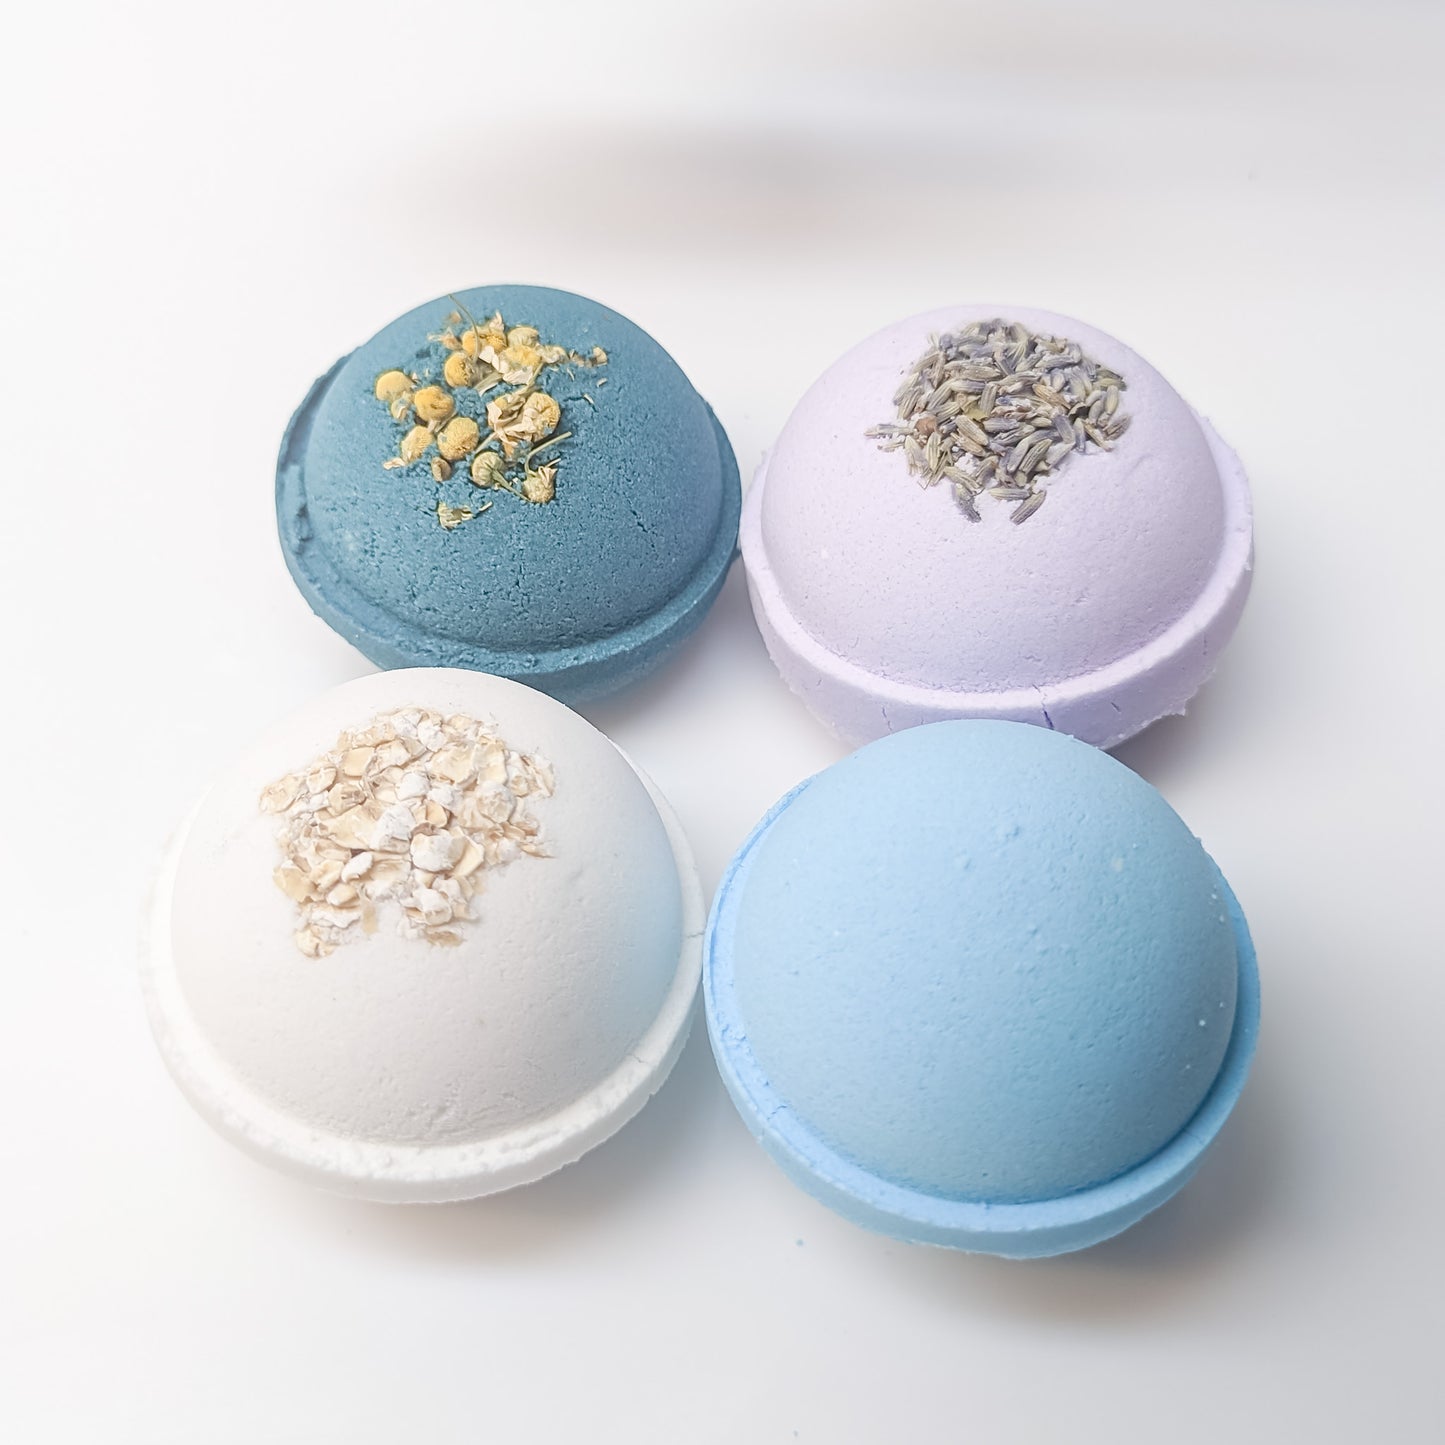 Blue Chamomile Bath BombBath BombsCG Pure WashElevate Your Bathing Experience with our Blue Chamomile Bath Bomb
Immerse yourself in pure bliss with our Blue Chamomile Bath Bomb. Indulge in the calming scent of c